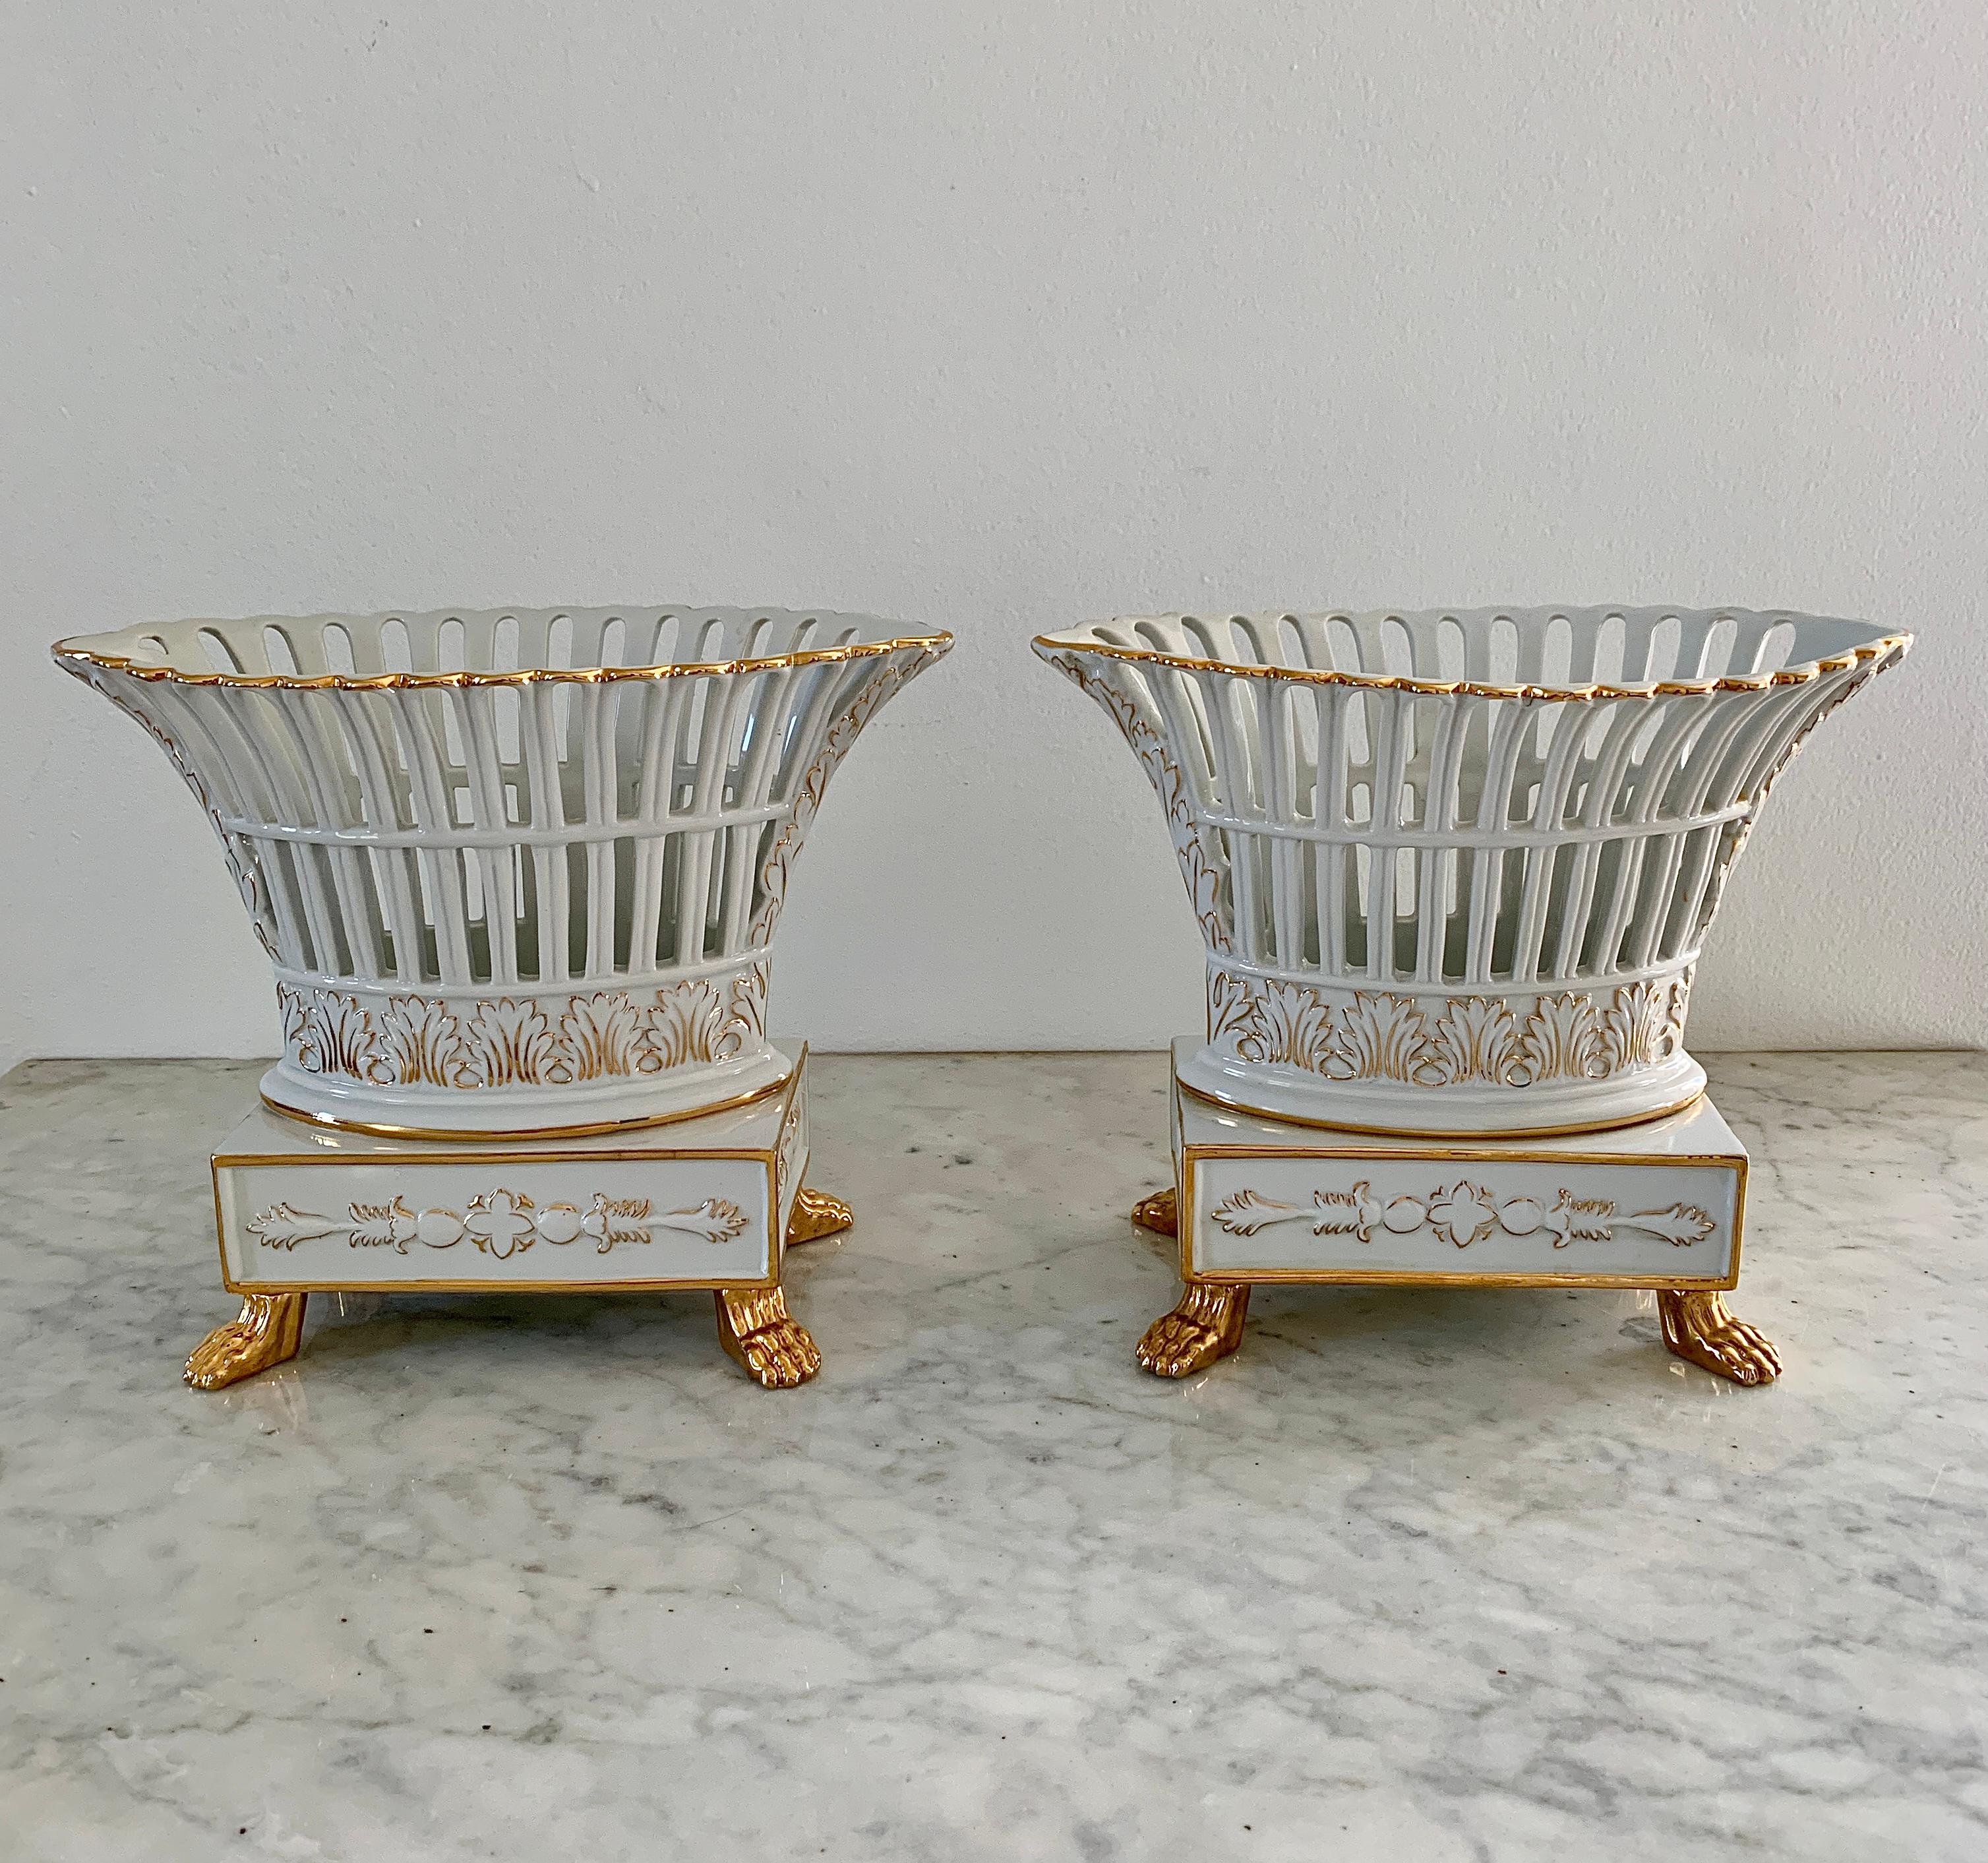 A gorgeous pair of white & gold regency style reticulated porcelain basket compotes with lion paw feet

Circa late 20th century.

Measures: 9.25